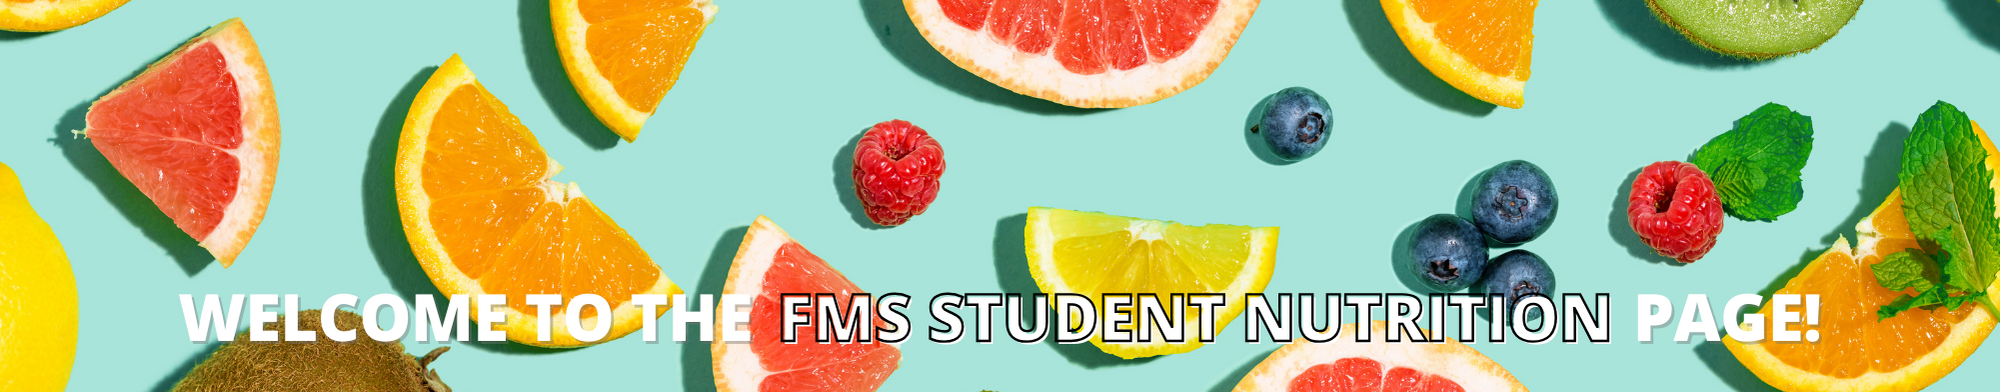 Welcome to the FMS Student Nutrition webpage!